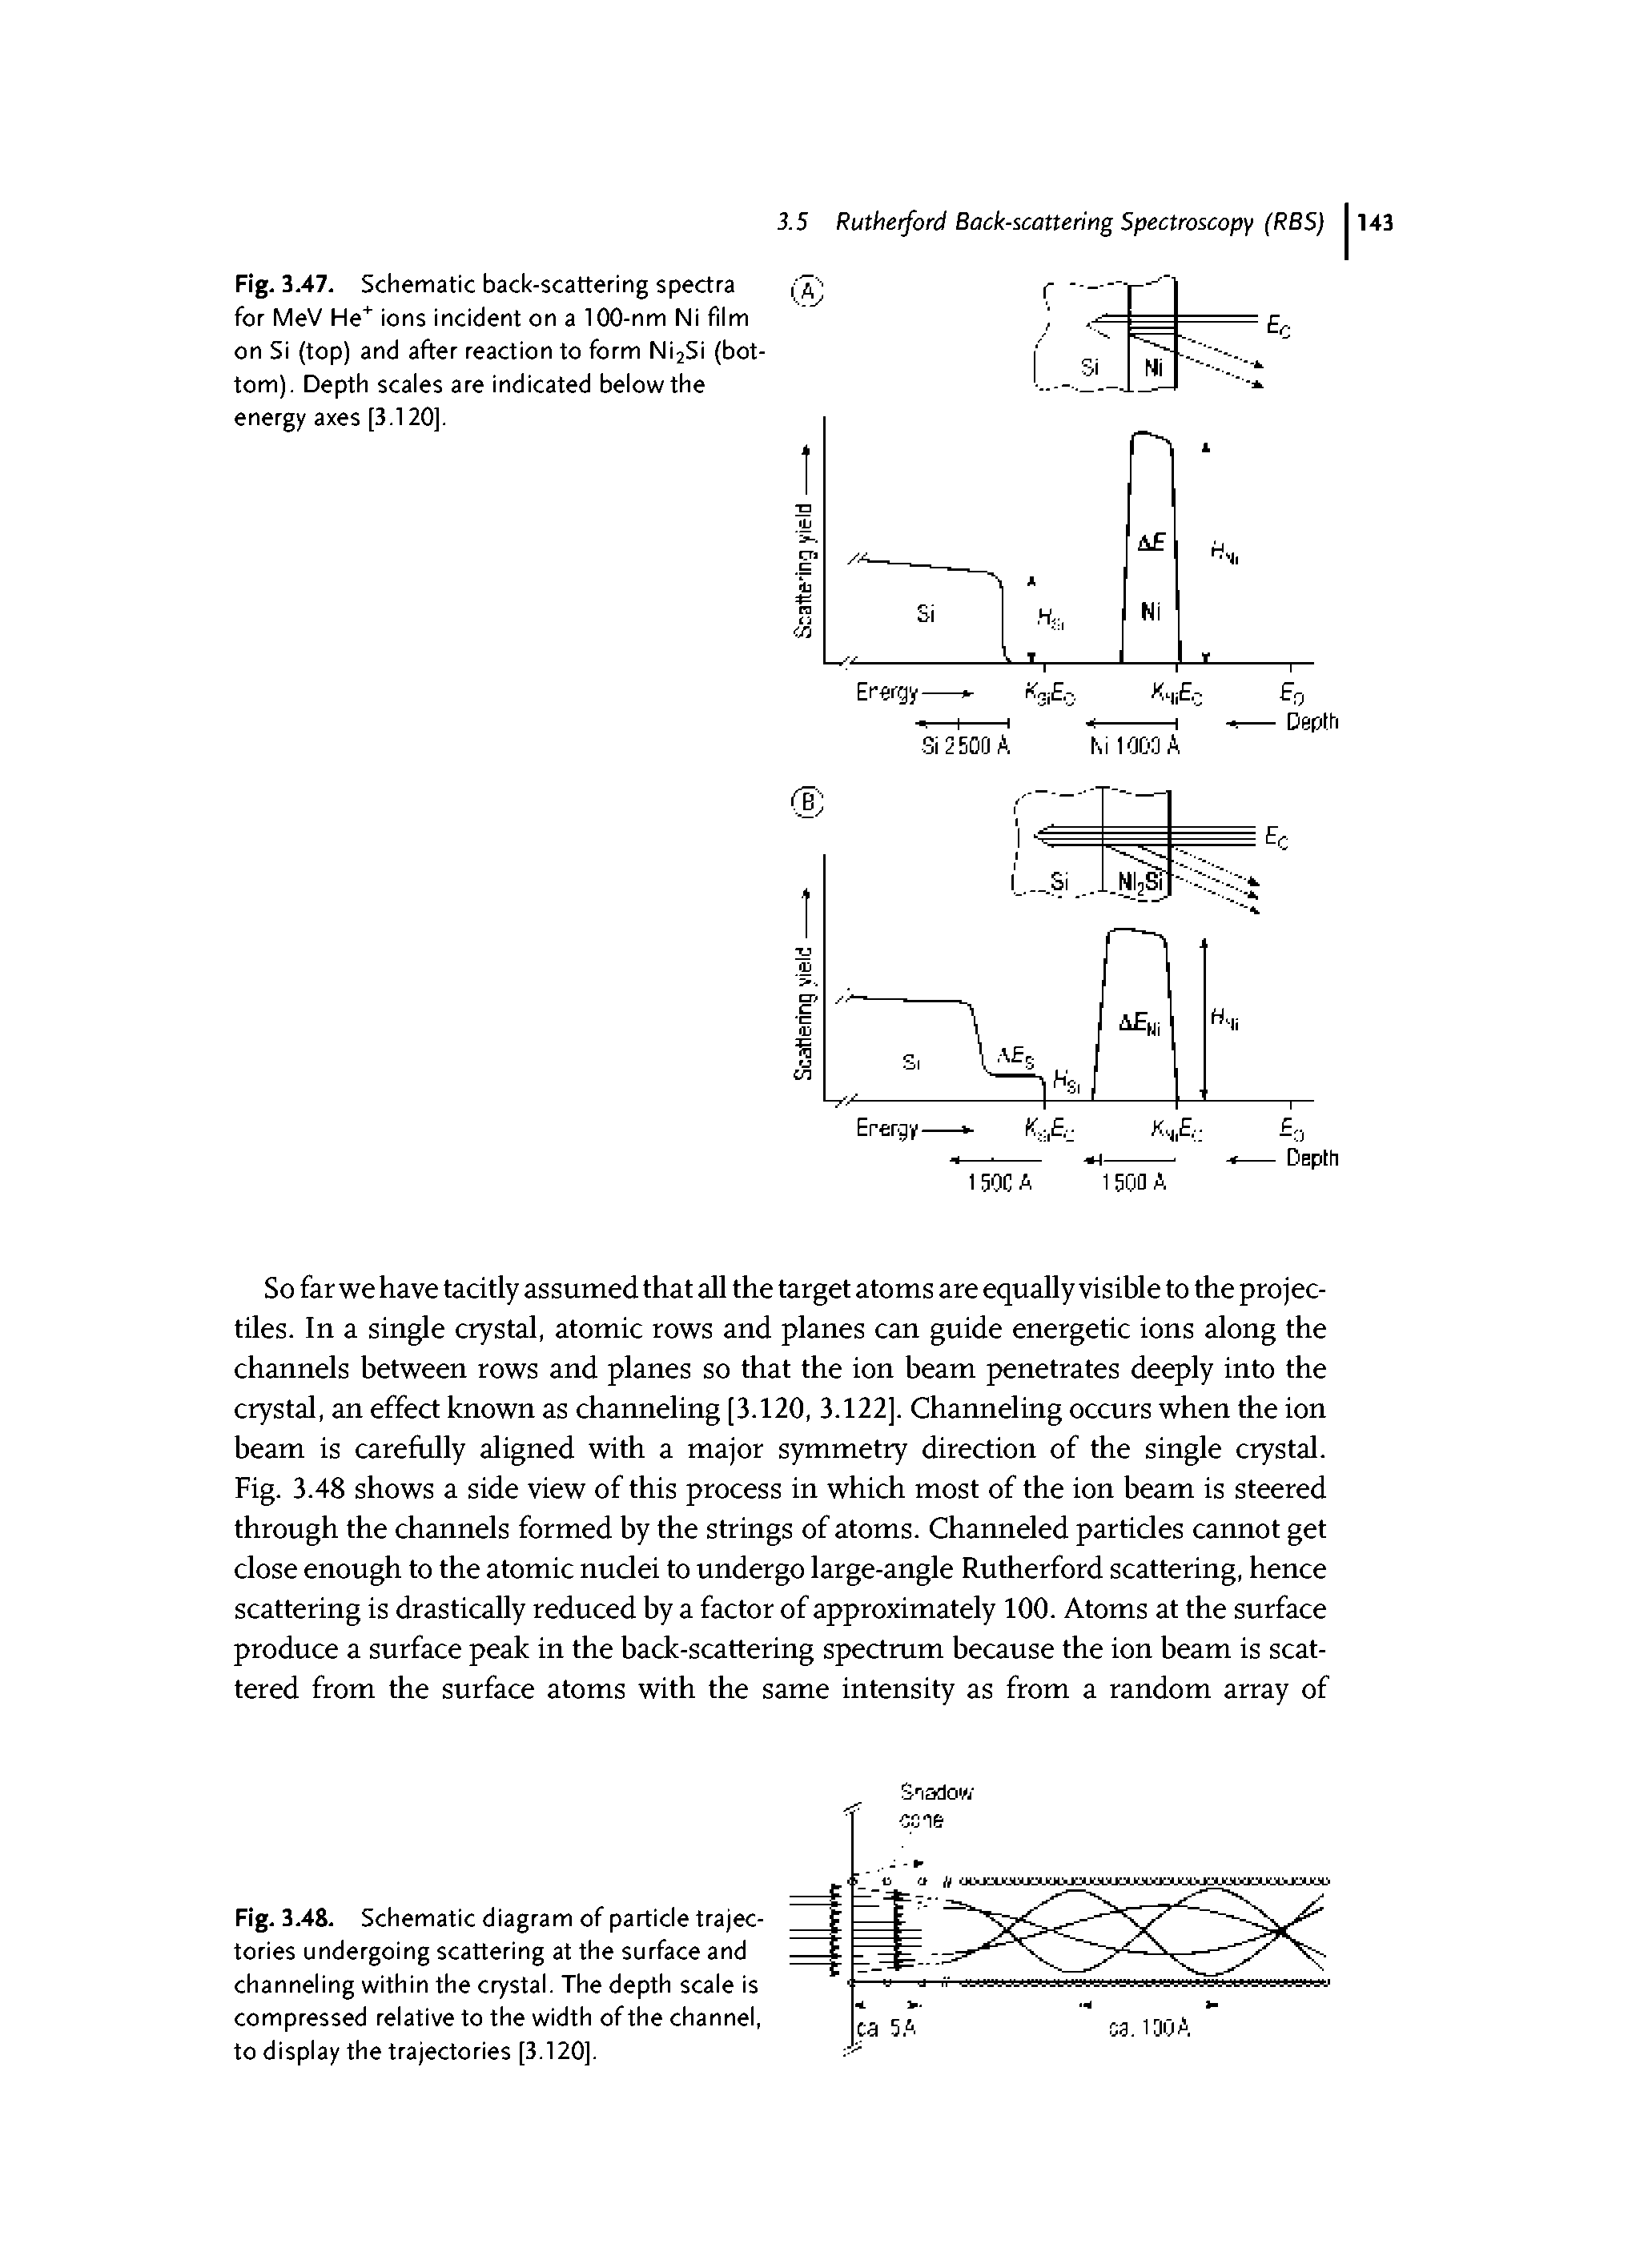 Fig. 3.48. Schematic diagram of particle trajectories undergoing scattering at the surface and channeling within the crystal. The depth scale is compressed relative to the width of the channel, to display the trajectories [3.120].